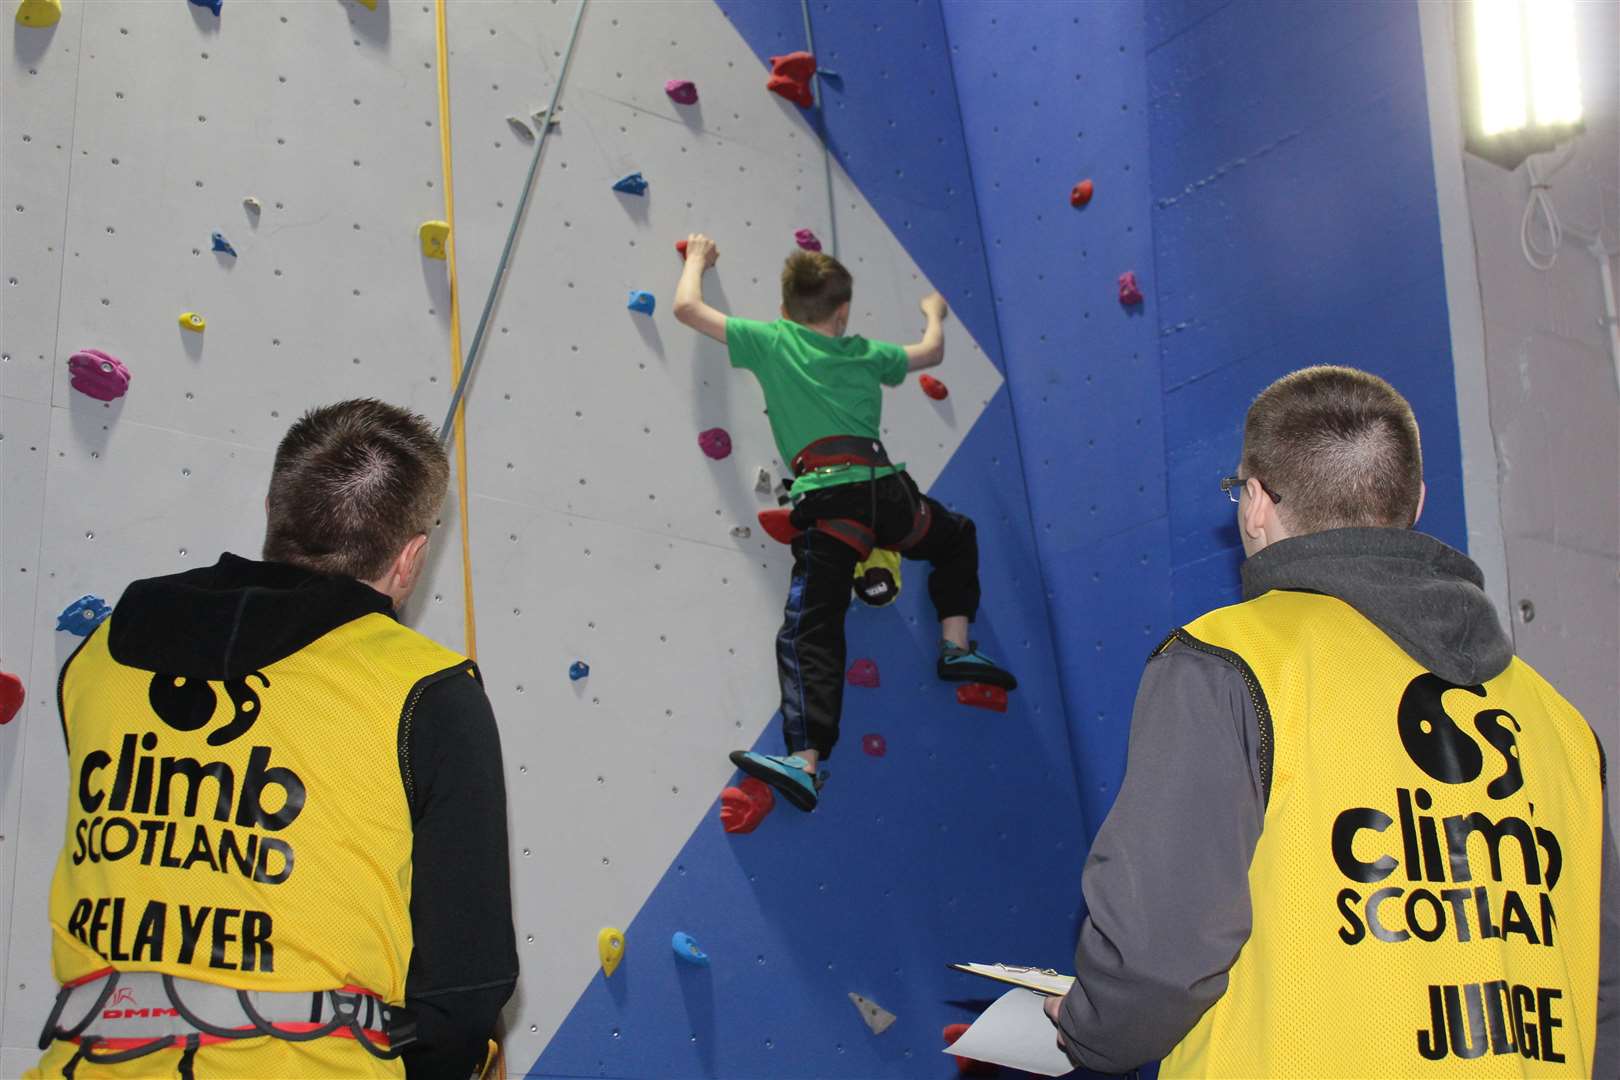 Climb Scotland is working with climbing walls with a view to reopening.